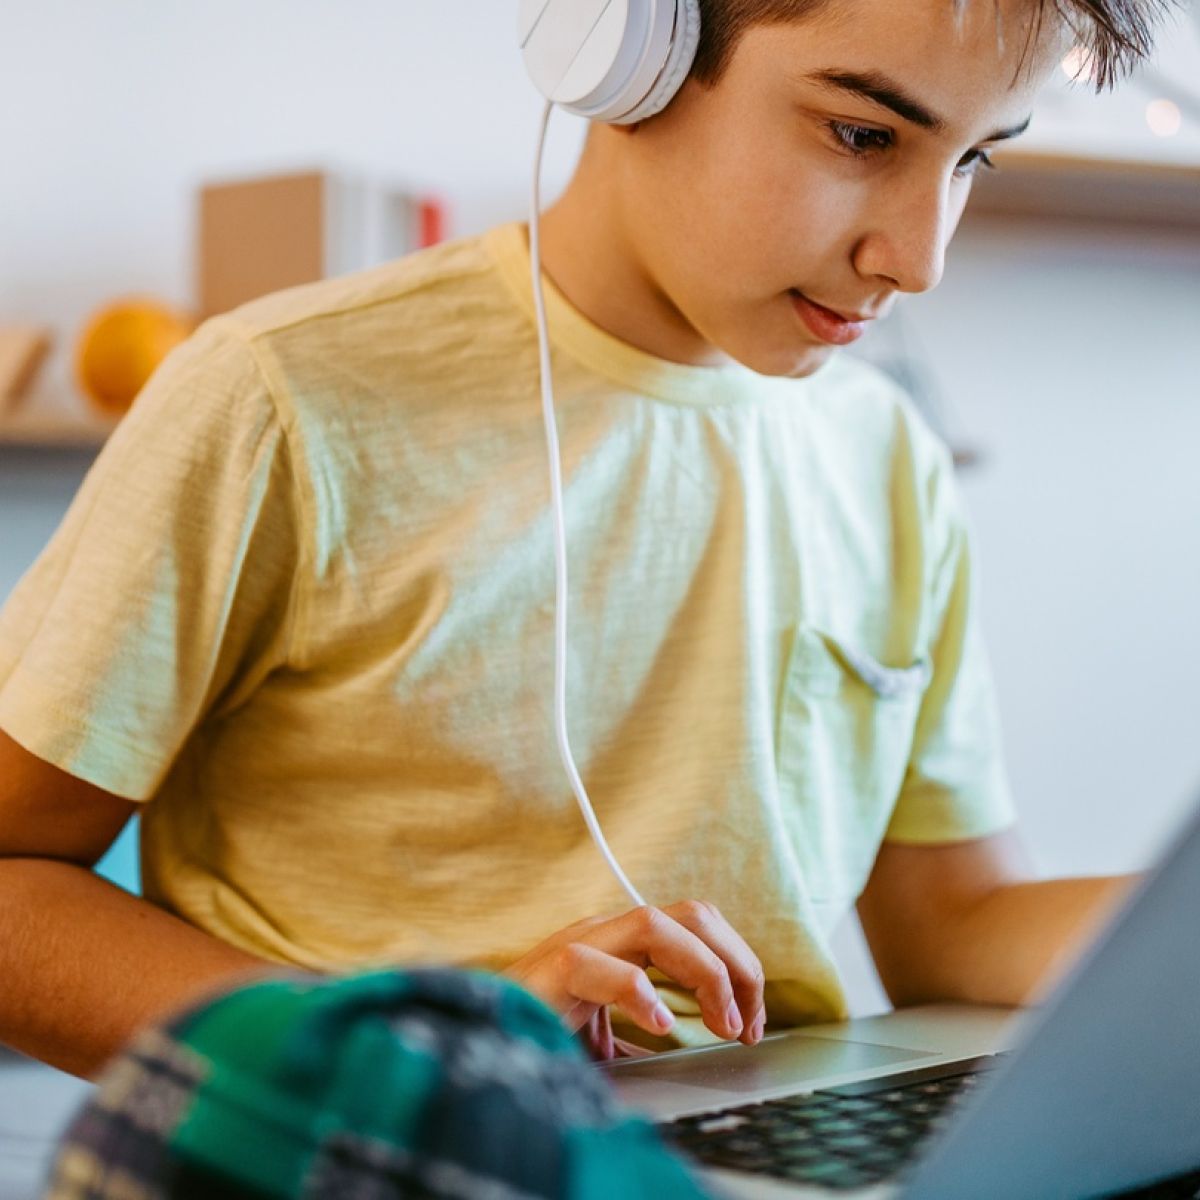 My 12-year-old son is looking up porn. What should I do?'